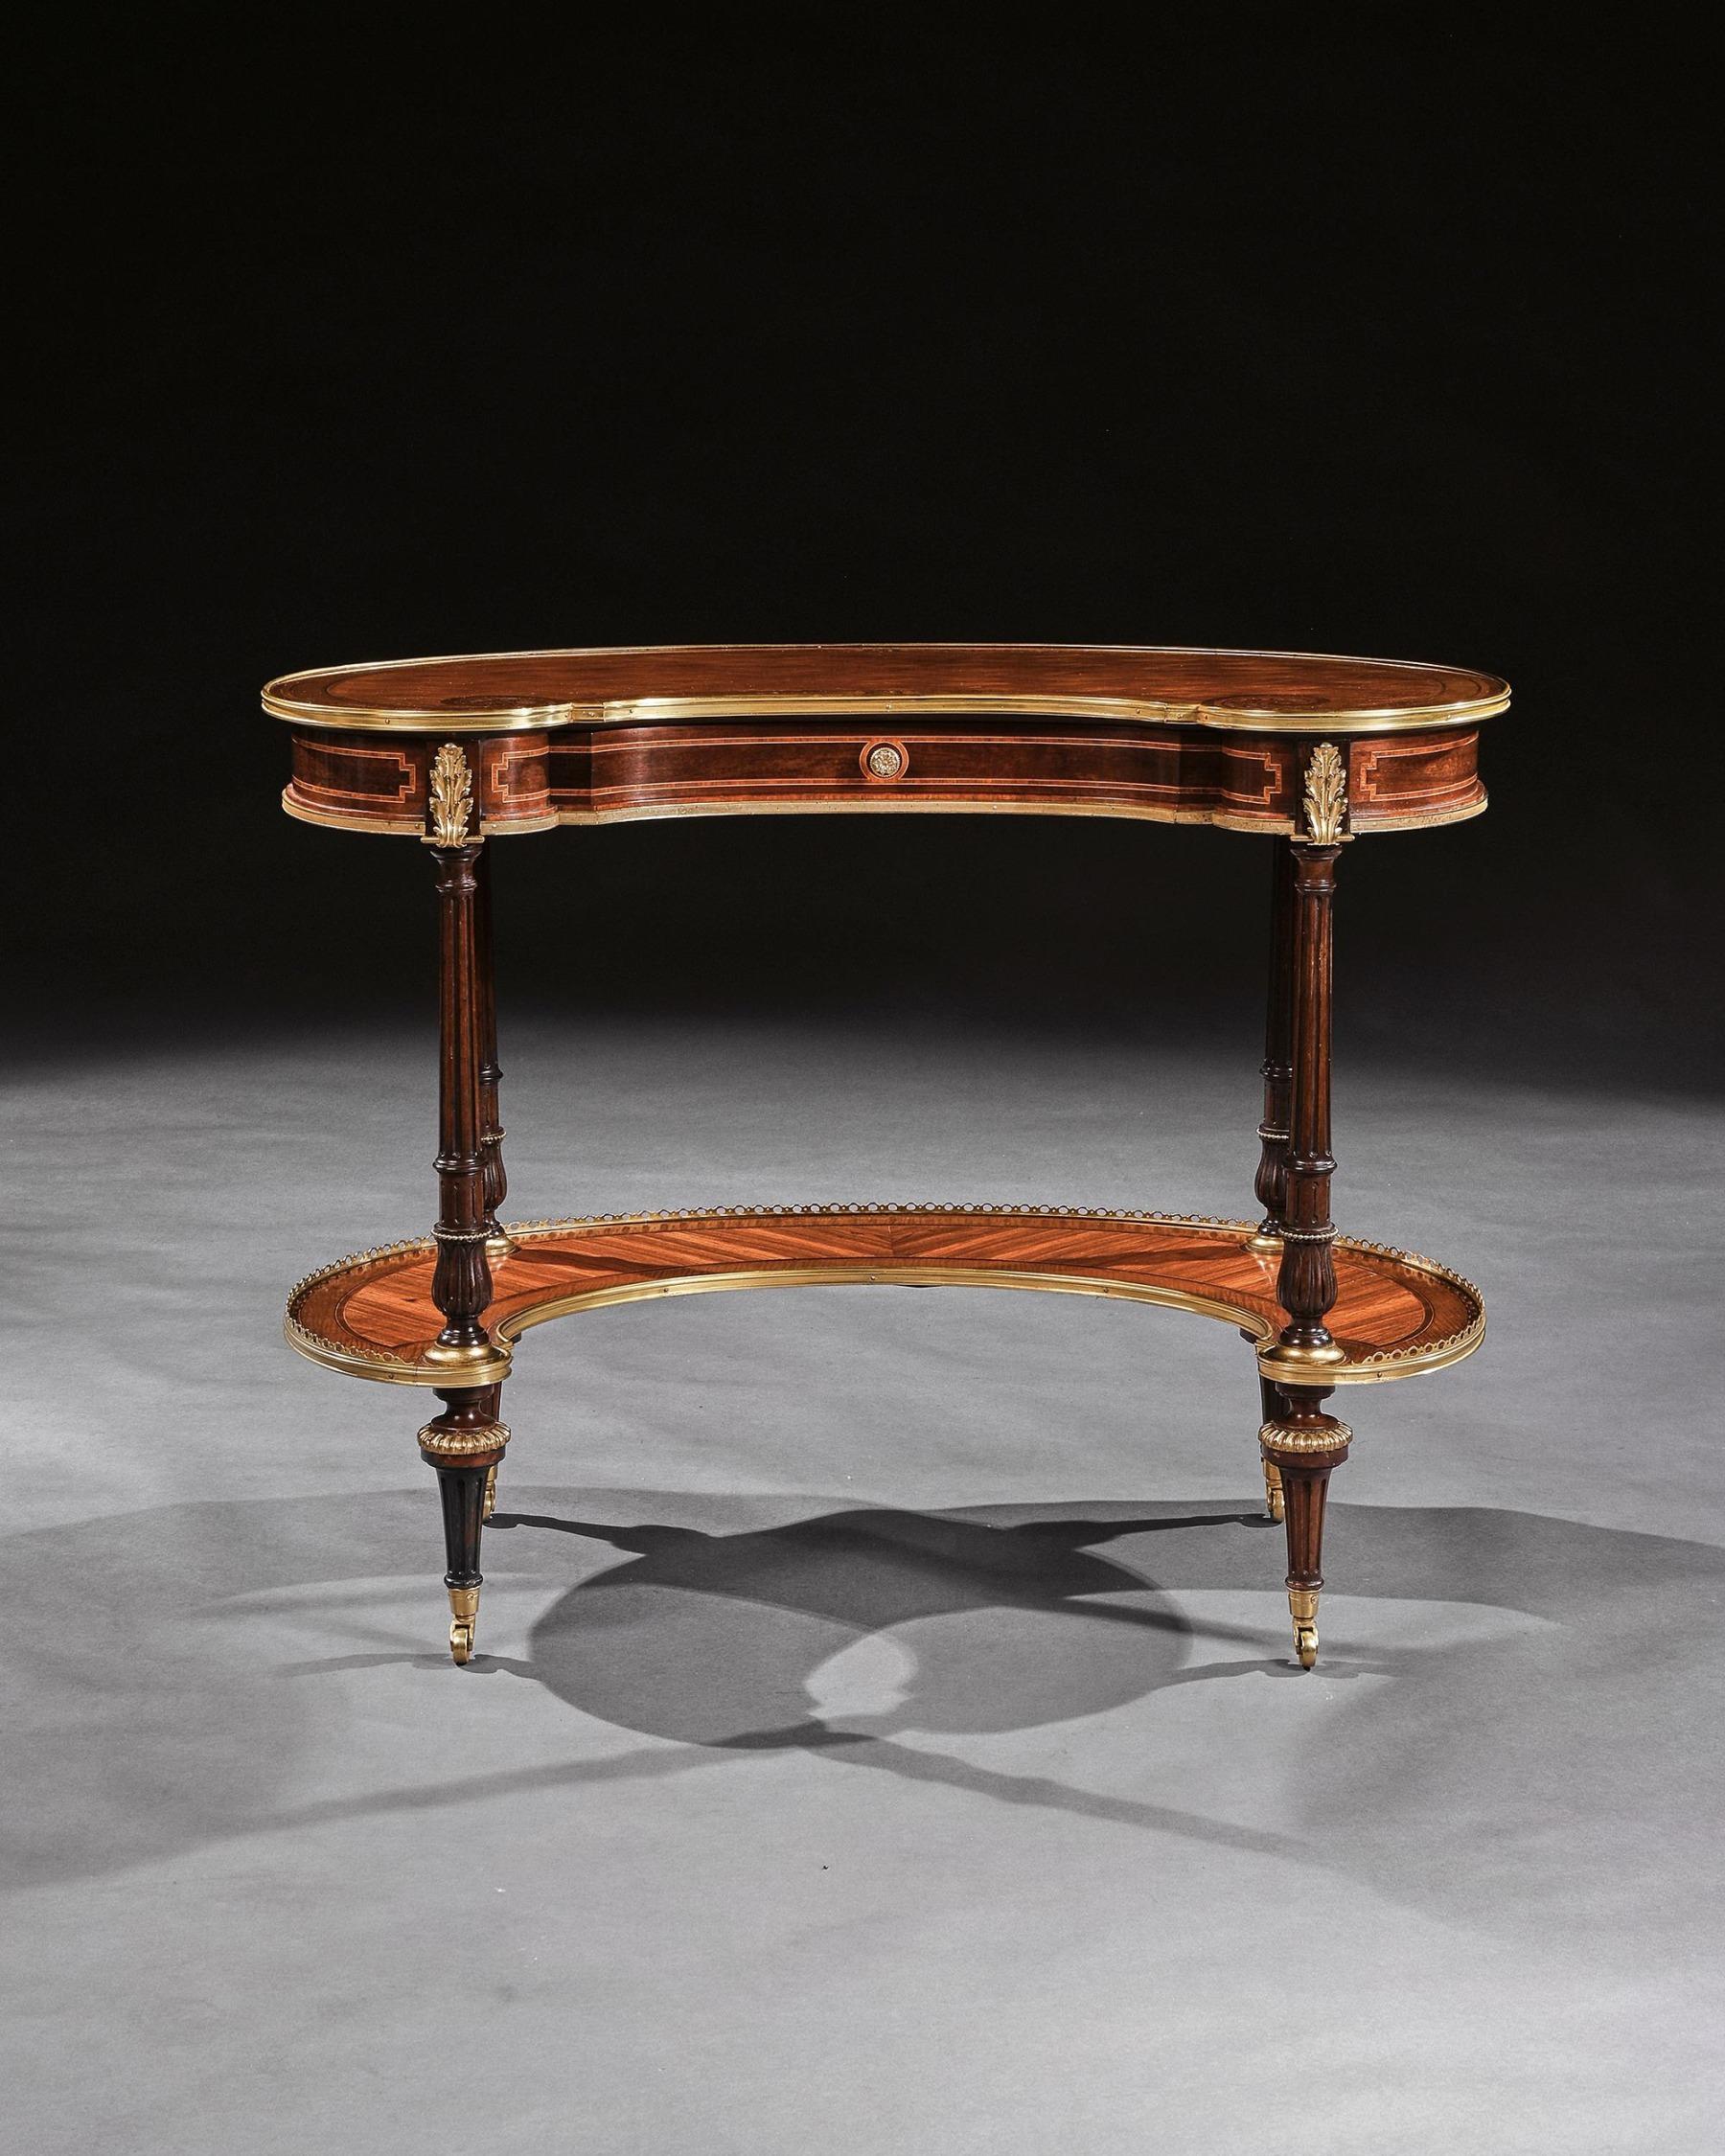 An extremely fine gilt bronze mounted parquetry kidney shaped writing table attributed to Gillows of Lancaster. 

English Circa 1865

The rosewood lozenge trellis inlaid kidney shaped top with finely detailed husks and paterae, banded with exotic